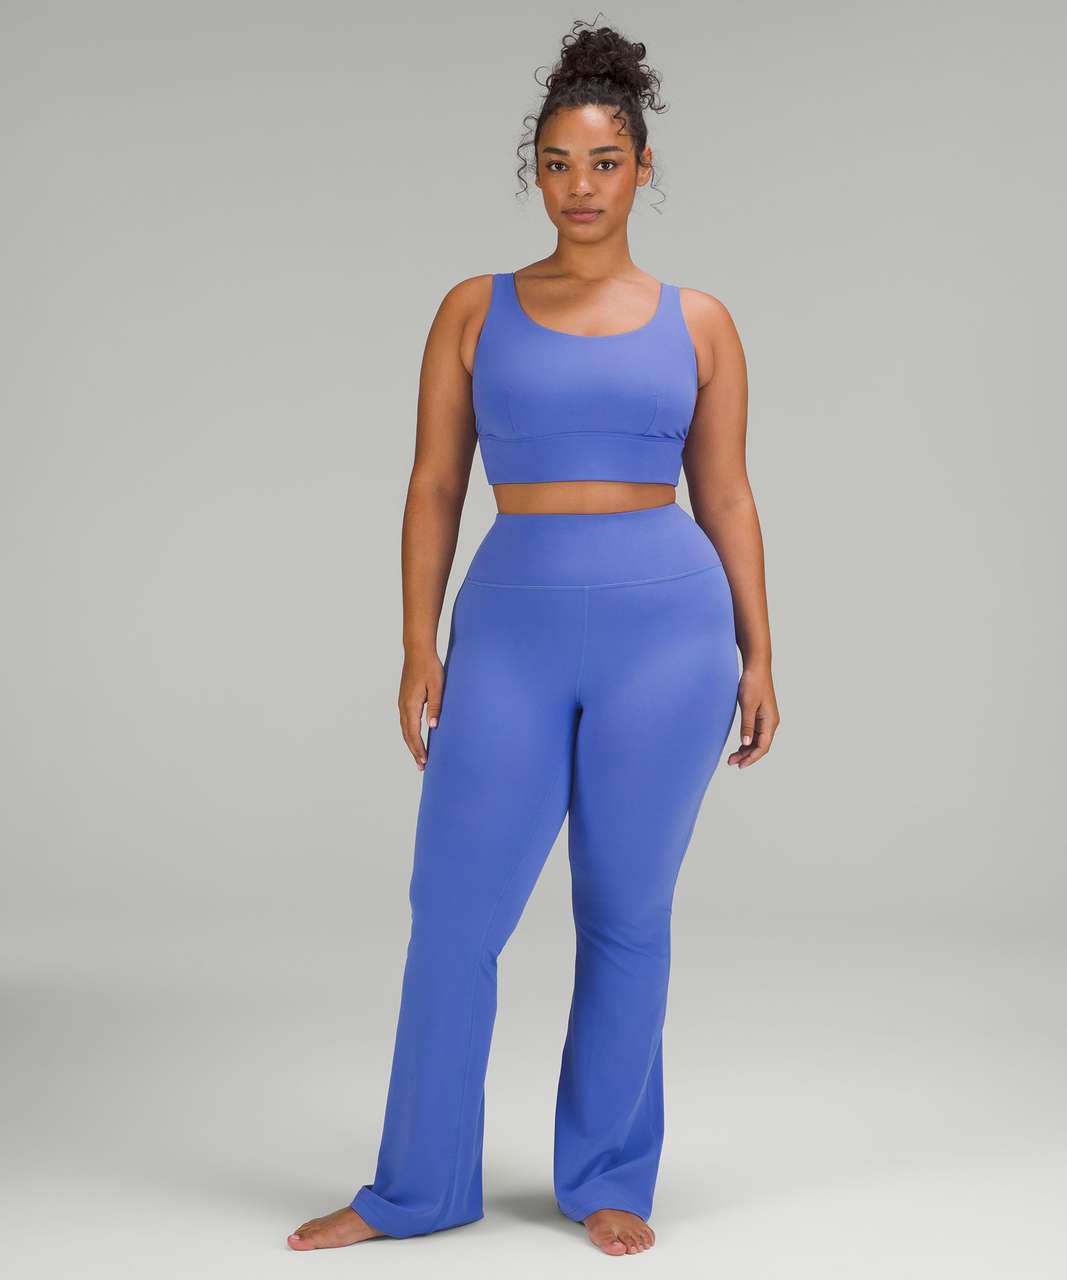 charged indigo flared pant nulu in size 2, i love it so much : r